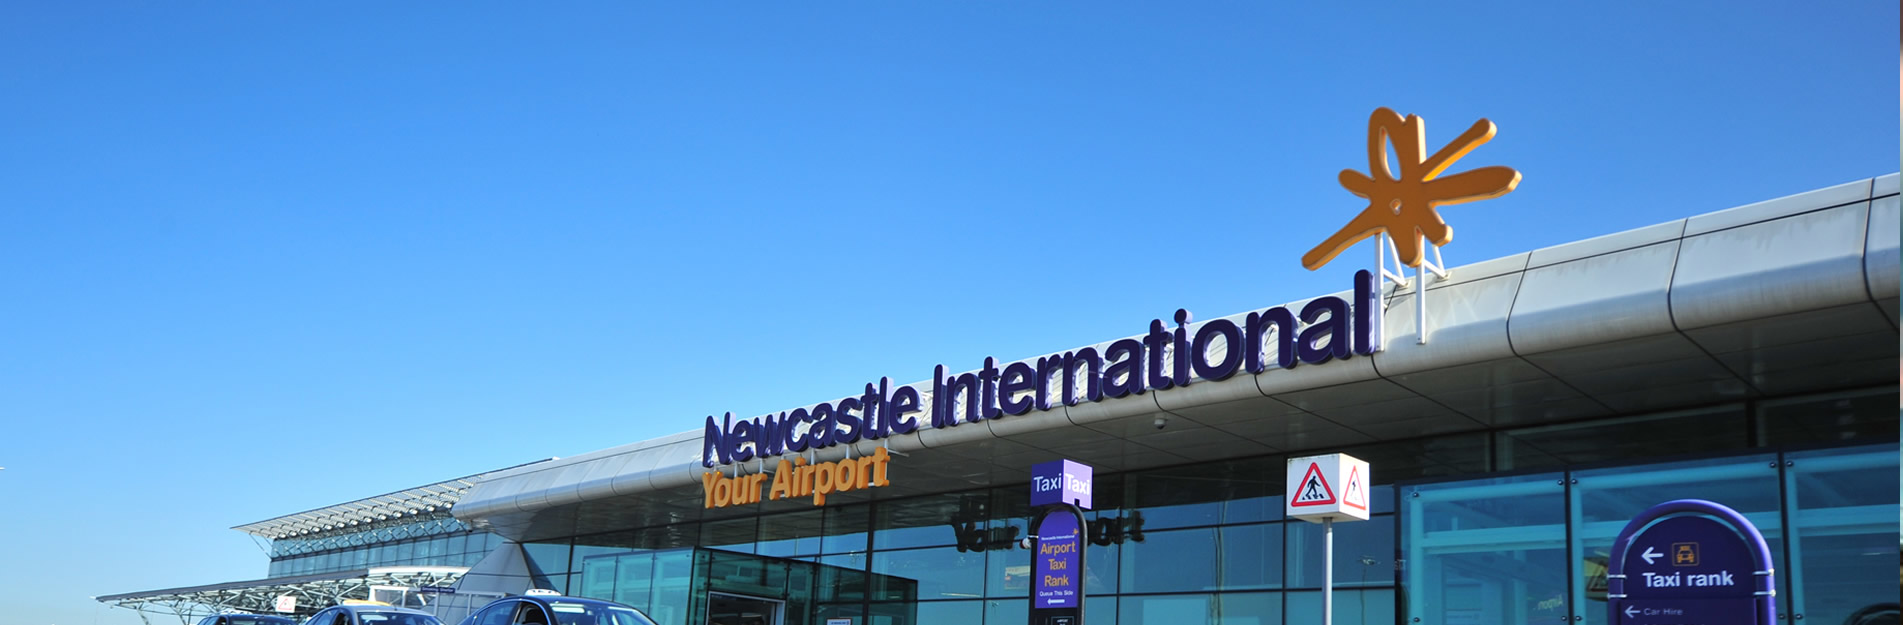 Get a Piste of the action as Jet2.com launches ski programme for Winter 23/24 from Newcastle International Airport